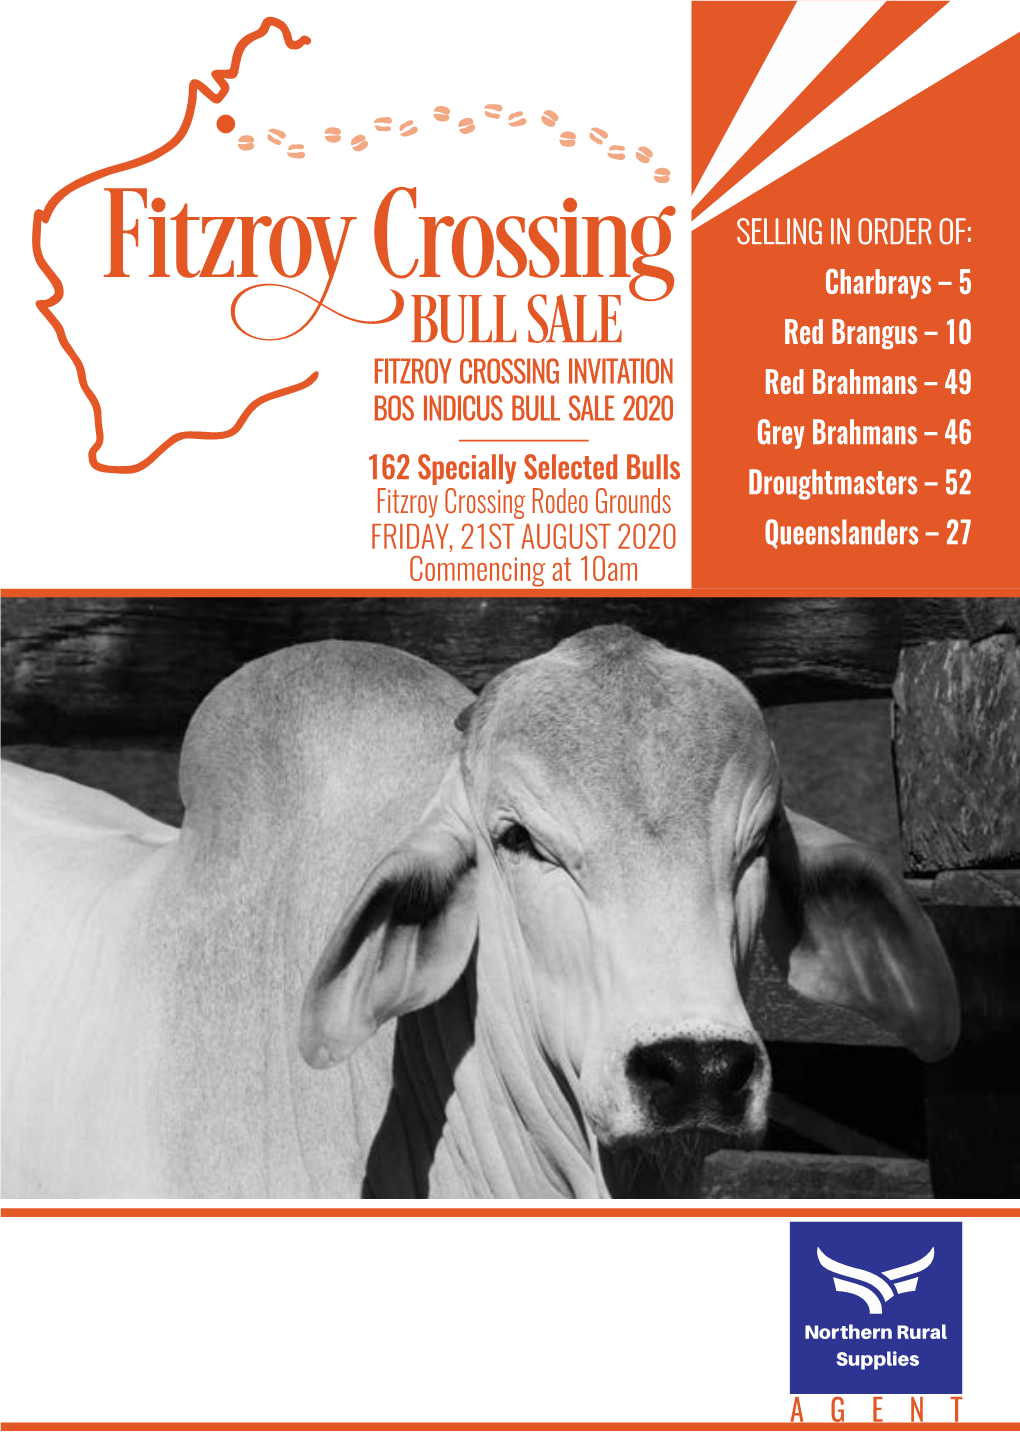 FITZROY CROSSING INVITATION BOS INDICUS BULL SALE 2020 162 Specially Selected Bulls Fitzroy Crossing Rodeo Grounds FRIDAY, 21ST